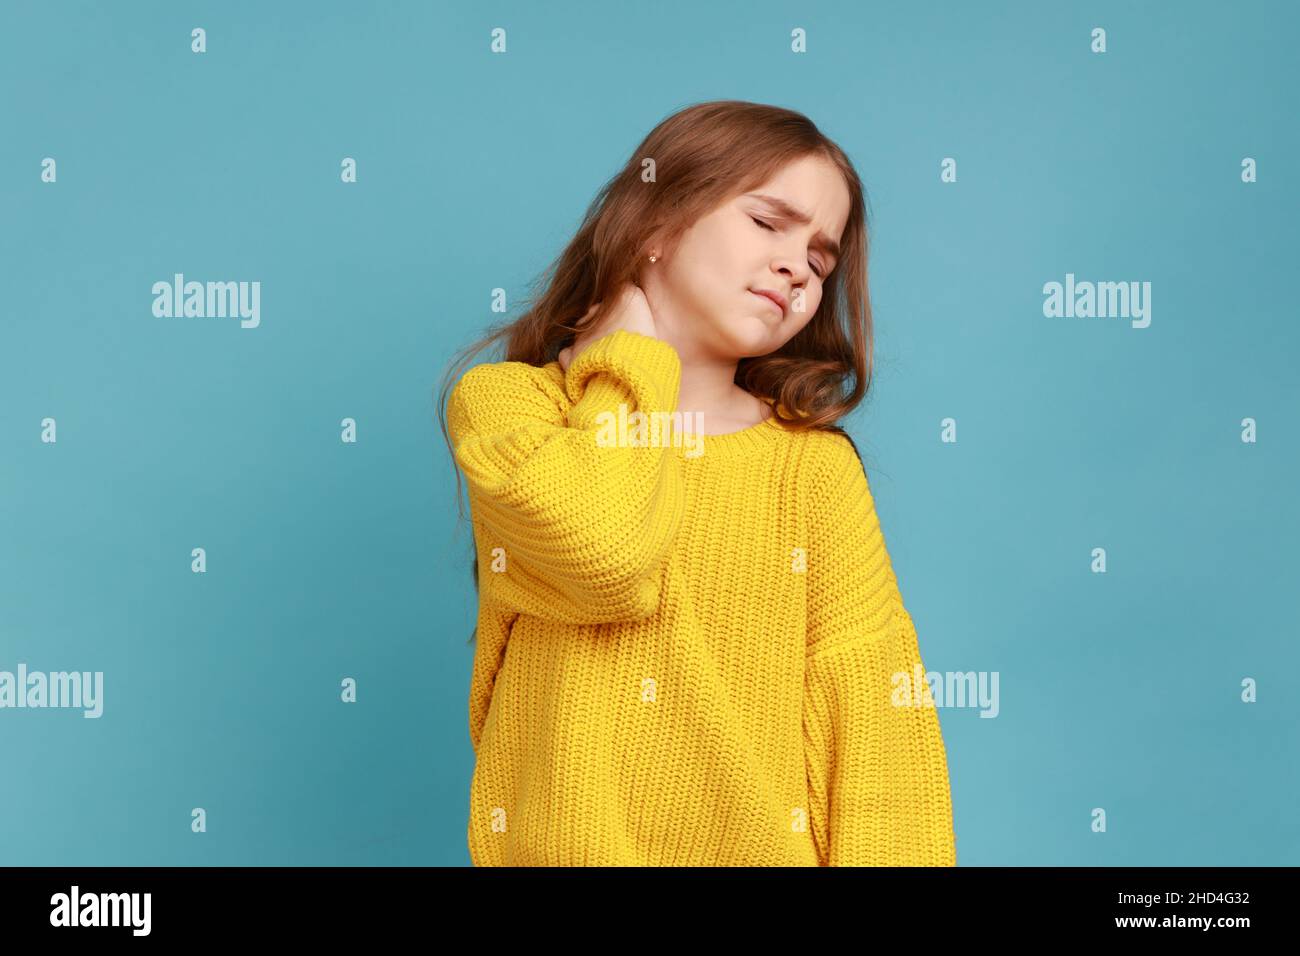 Portrait of little girl massaging painful back, feel discomfort in neck, child sedentary lifestyle, wearing yellow casual style sweater. Indoor studio shot isolated on blue background. Stock Photo